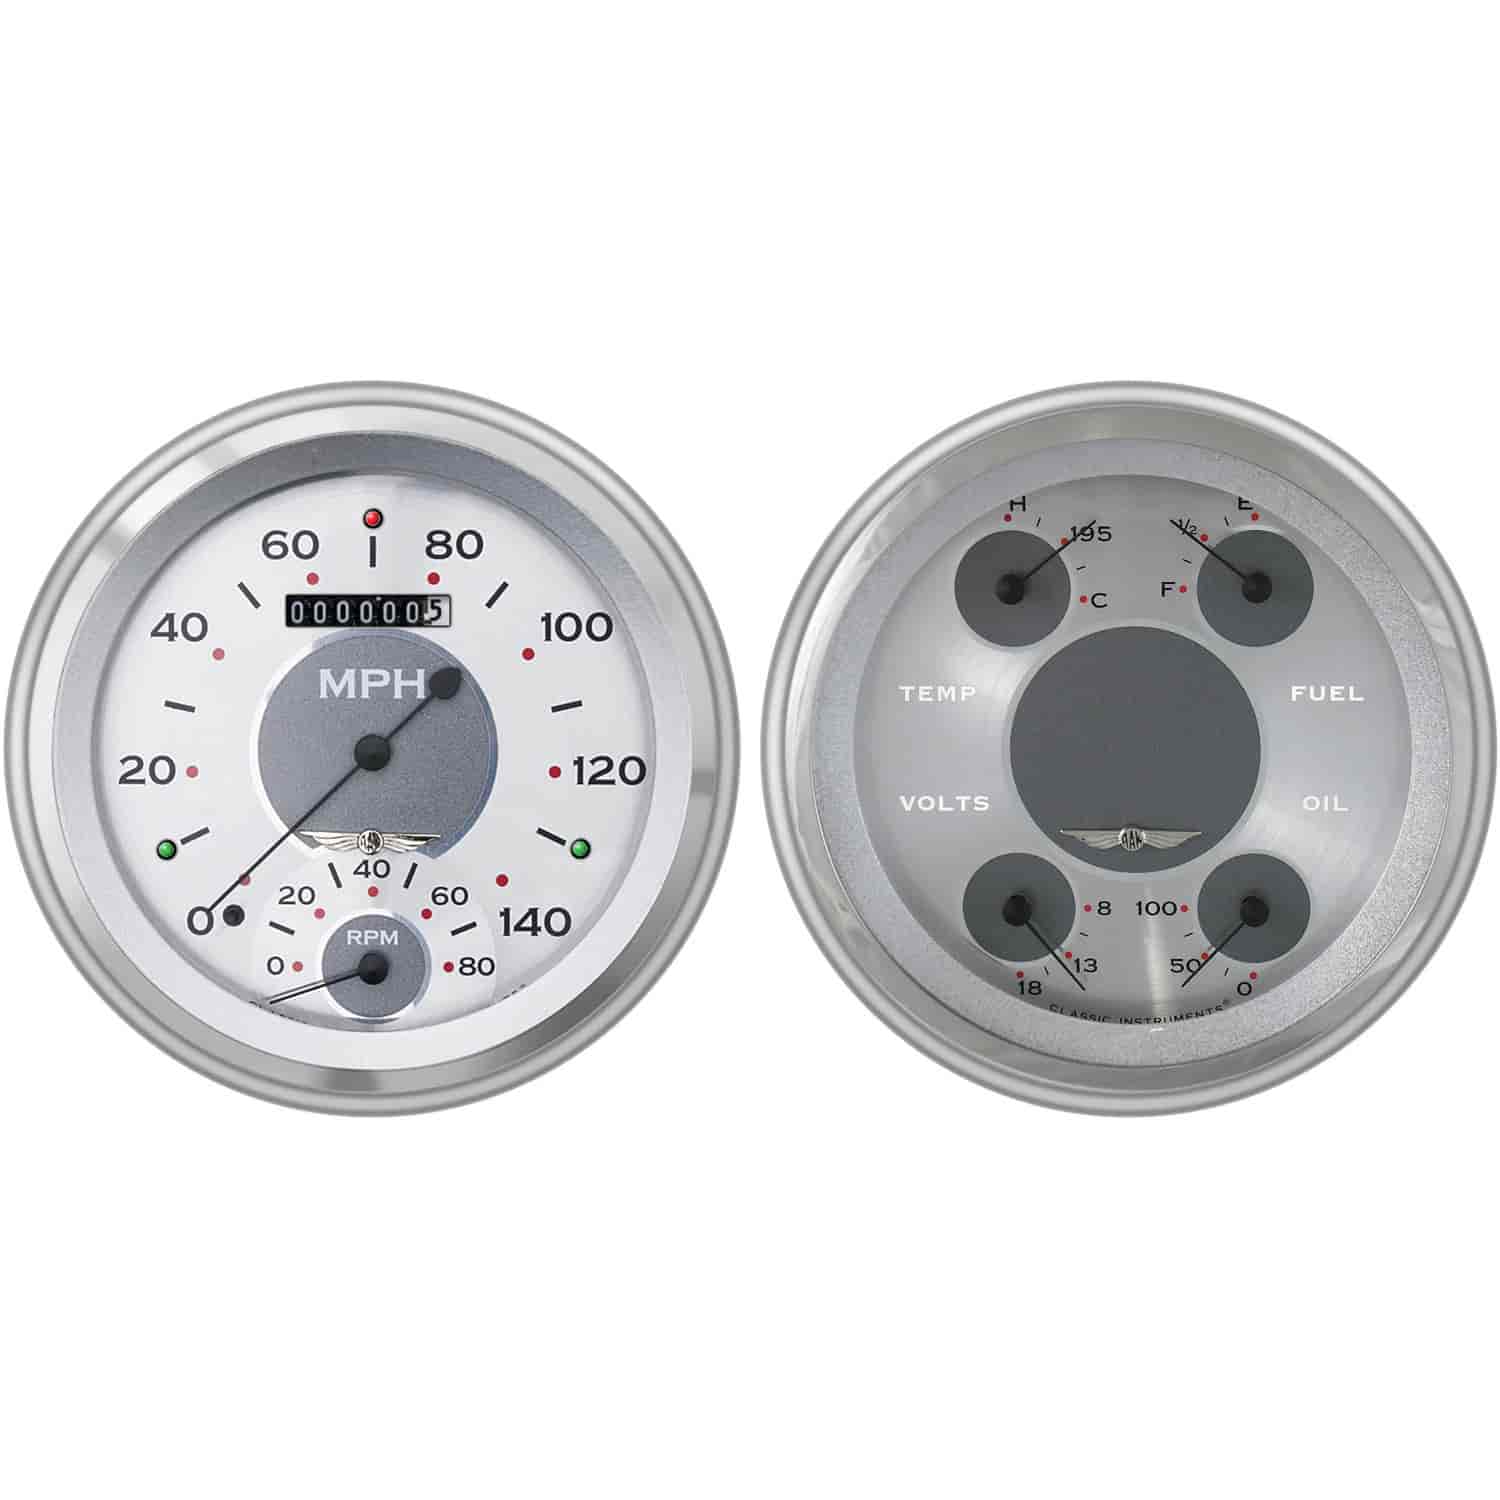 All American Series Gauge Package 1951-52 Chevy Car Includes: